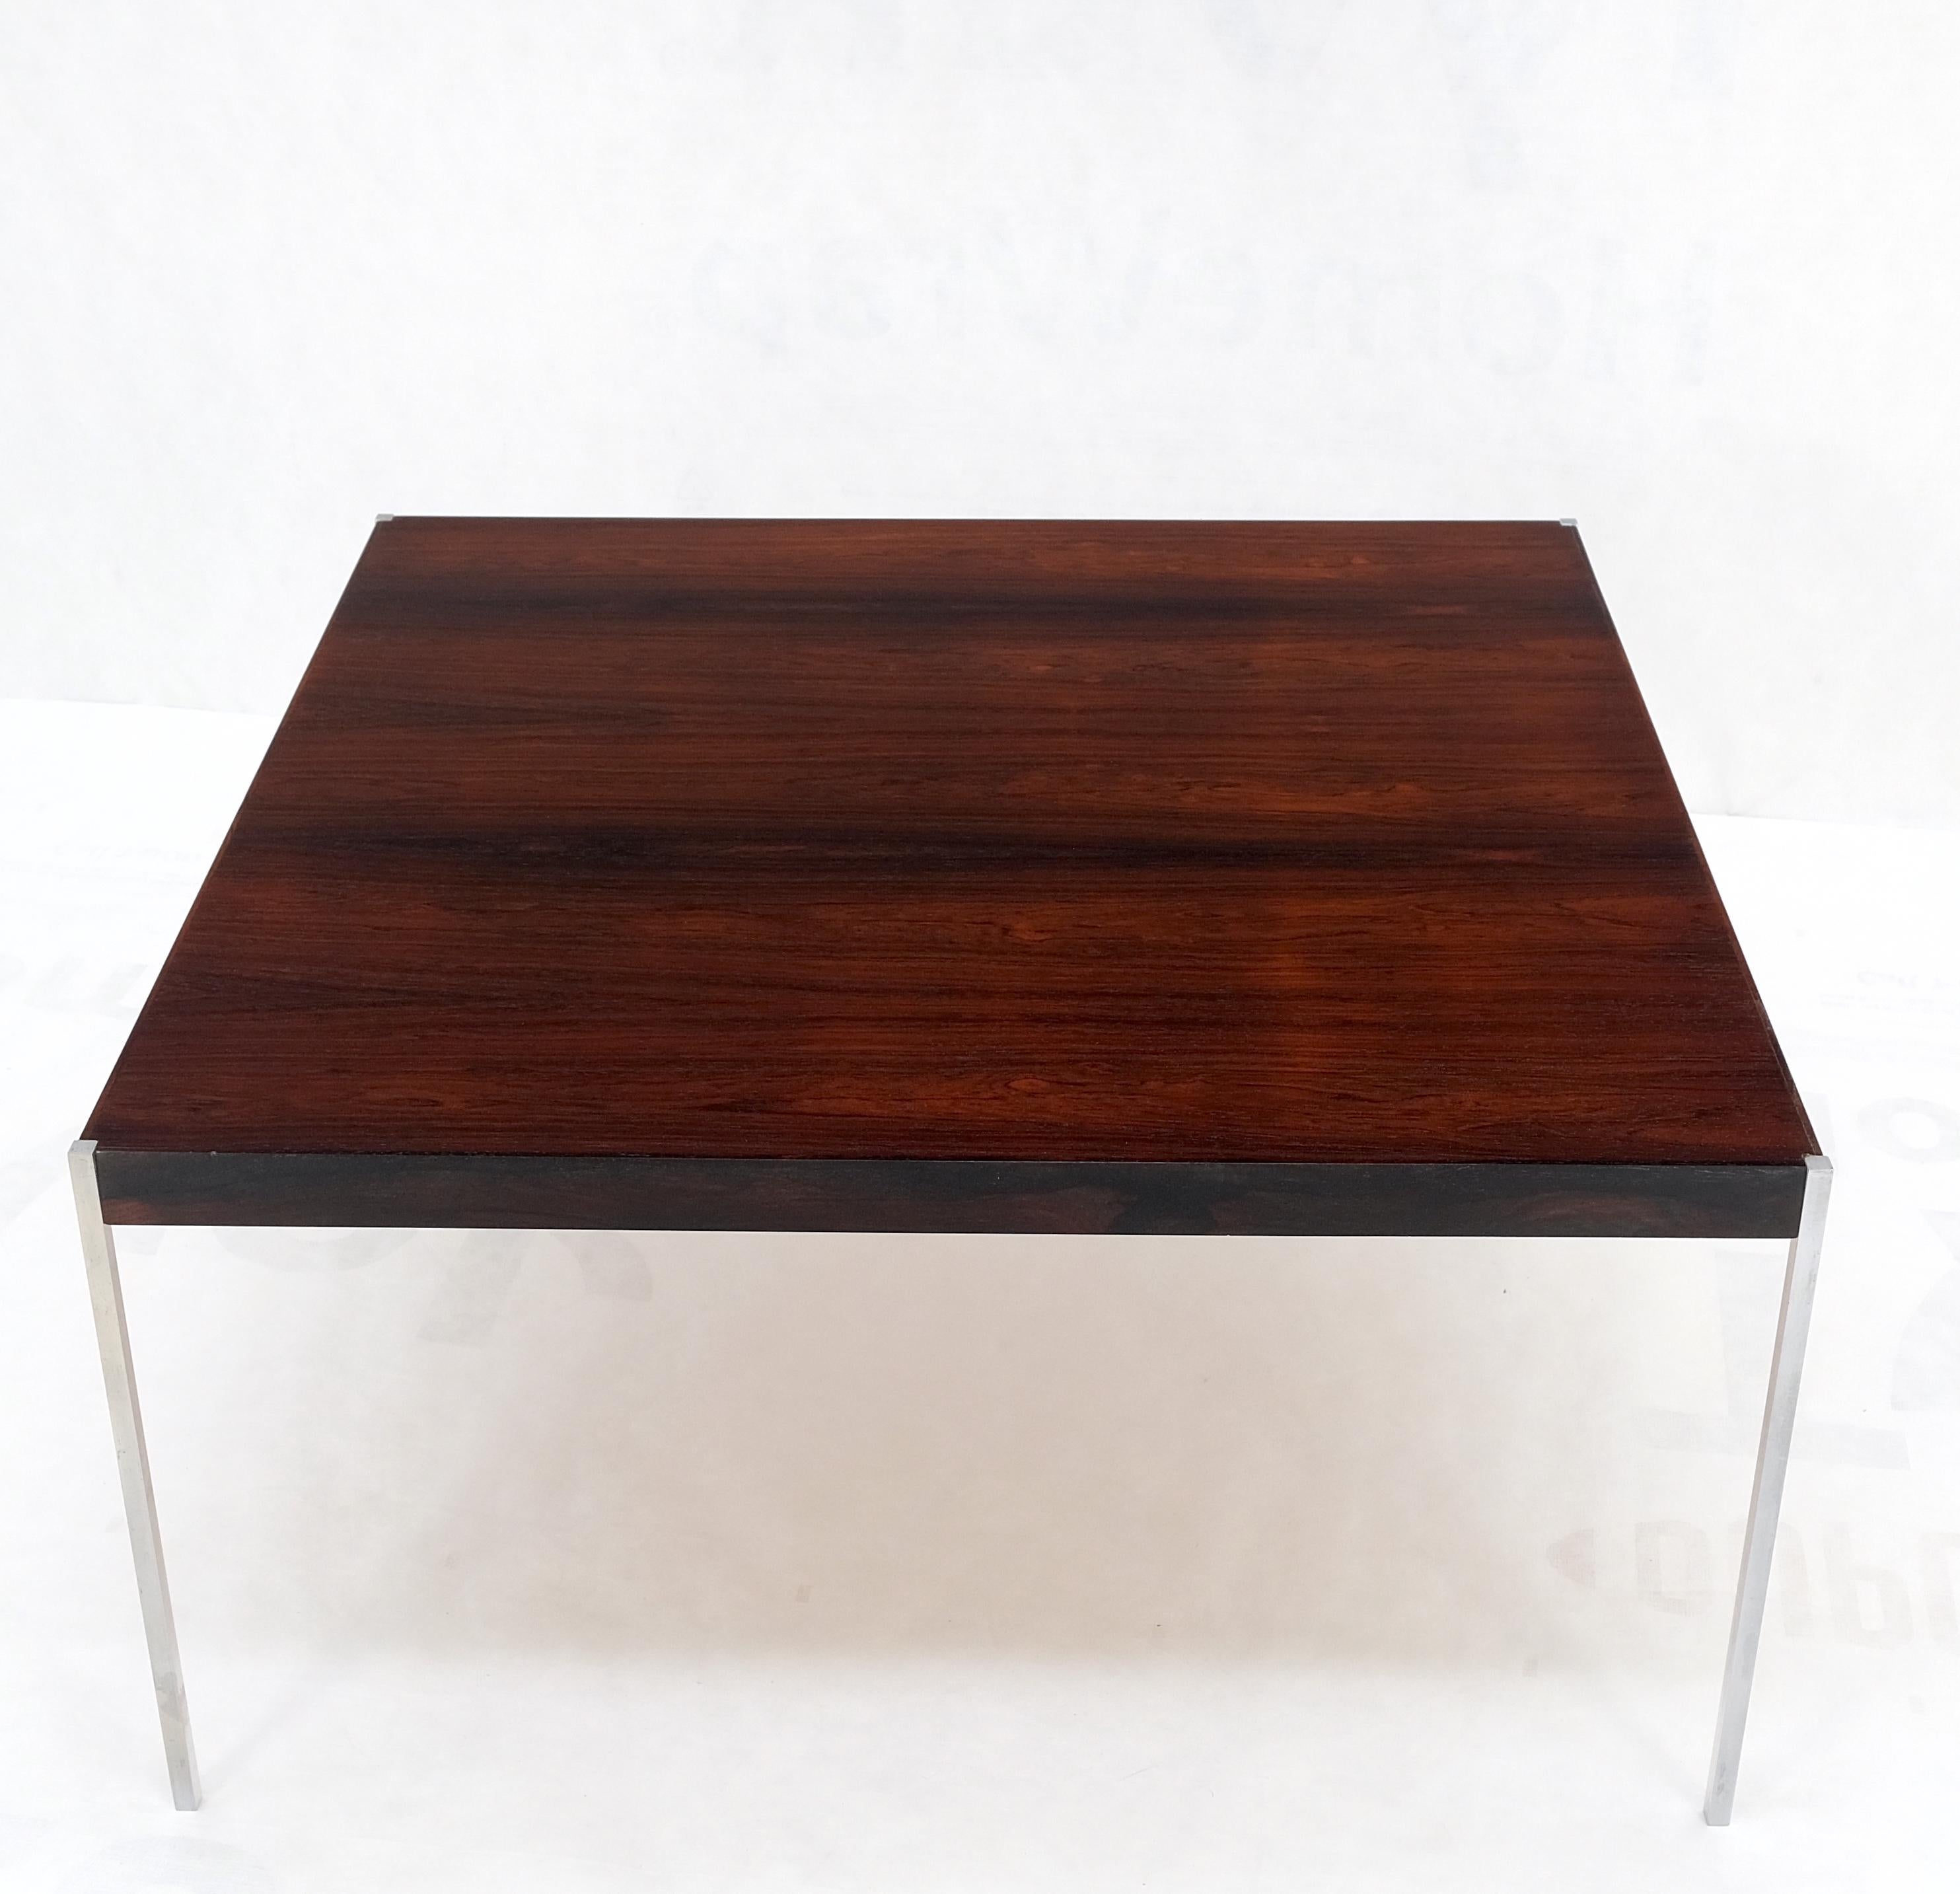 Rosewood Square Top Thin Chrome Square Bar Legs Danish Mid-Century Coffee Table For Sale 2